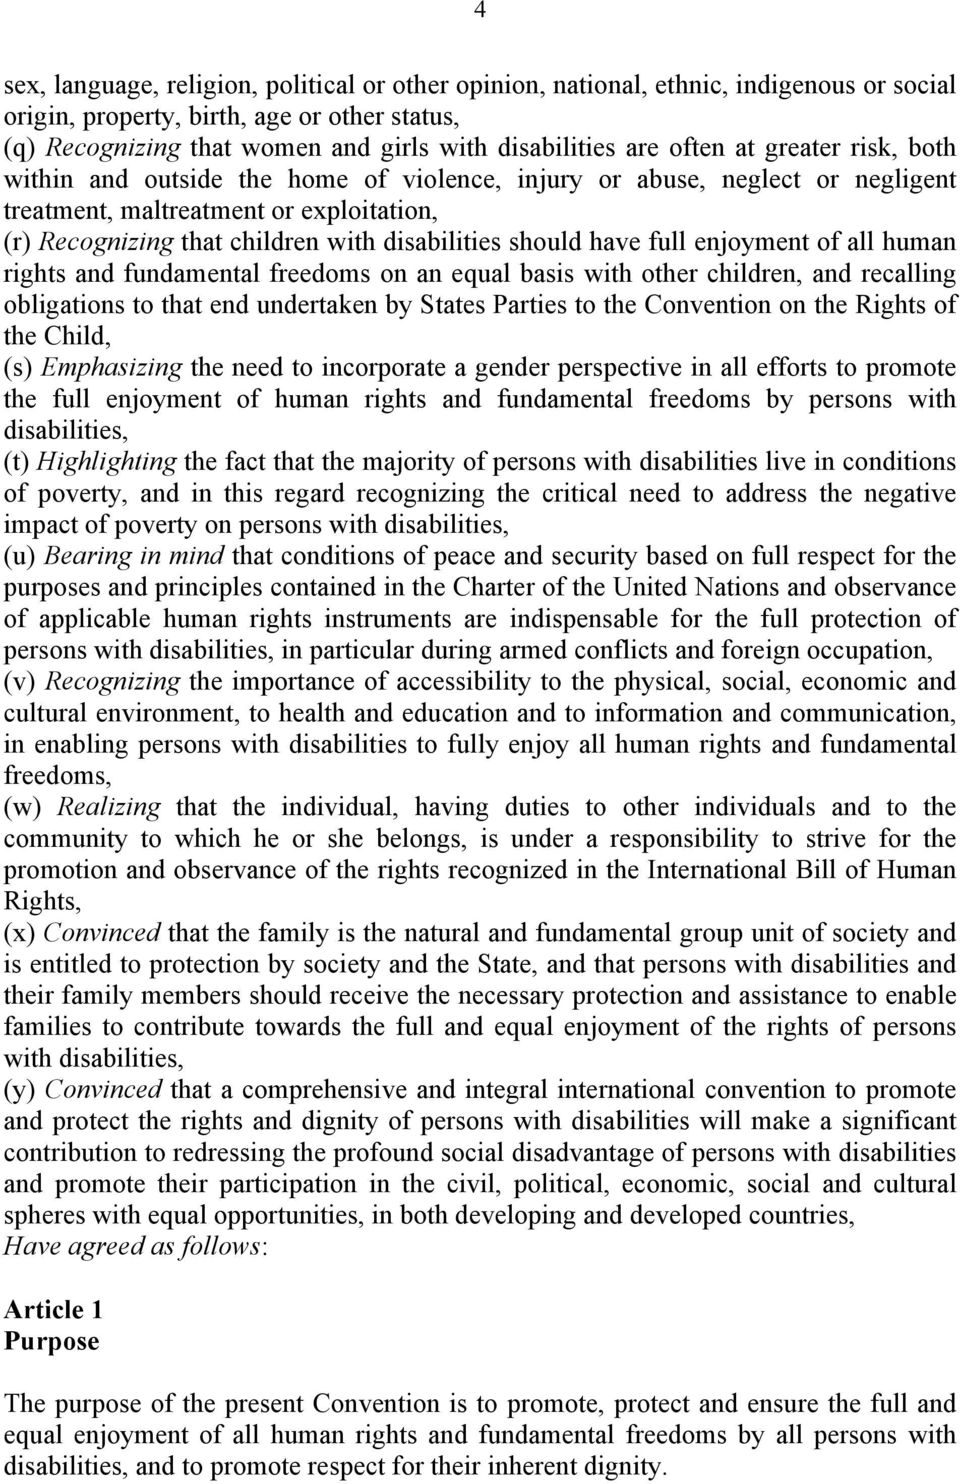 should have full enjoyment of all human rights and fundamental freedoms on an equal basis with other children, and recalling obligations to that end undertaken by States Parties to the Convention on